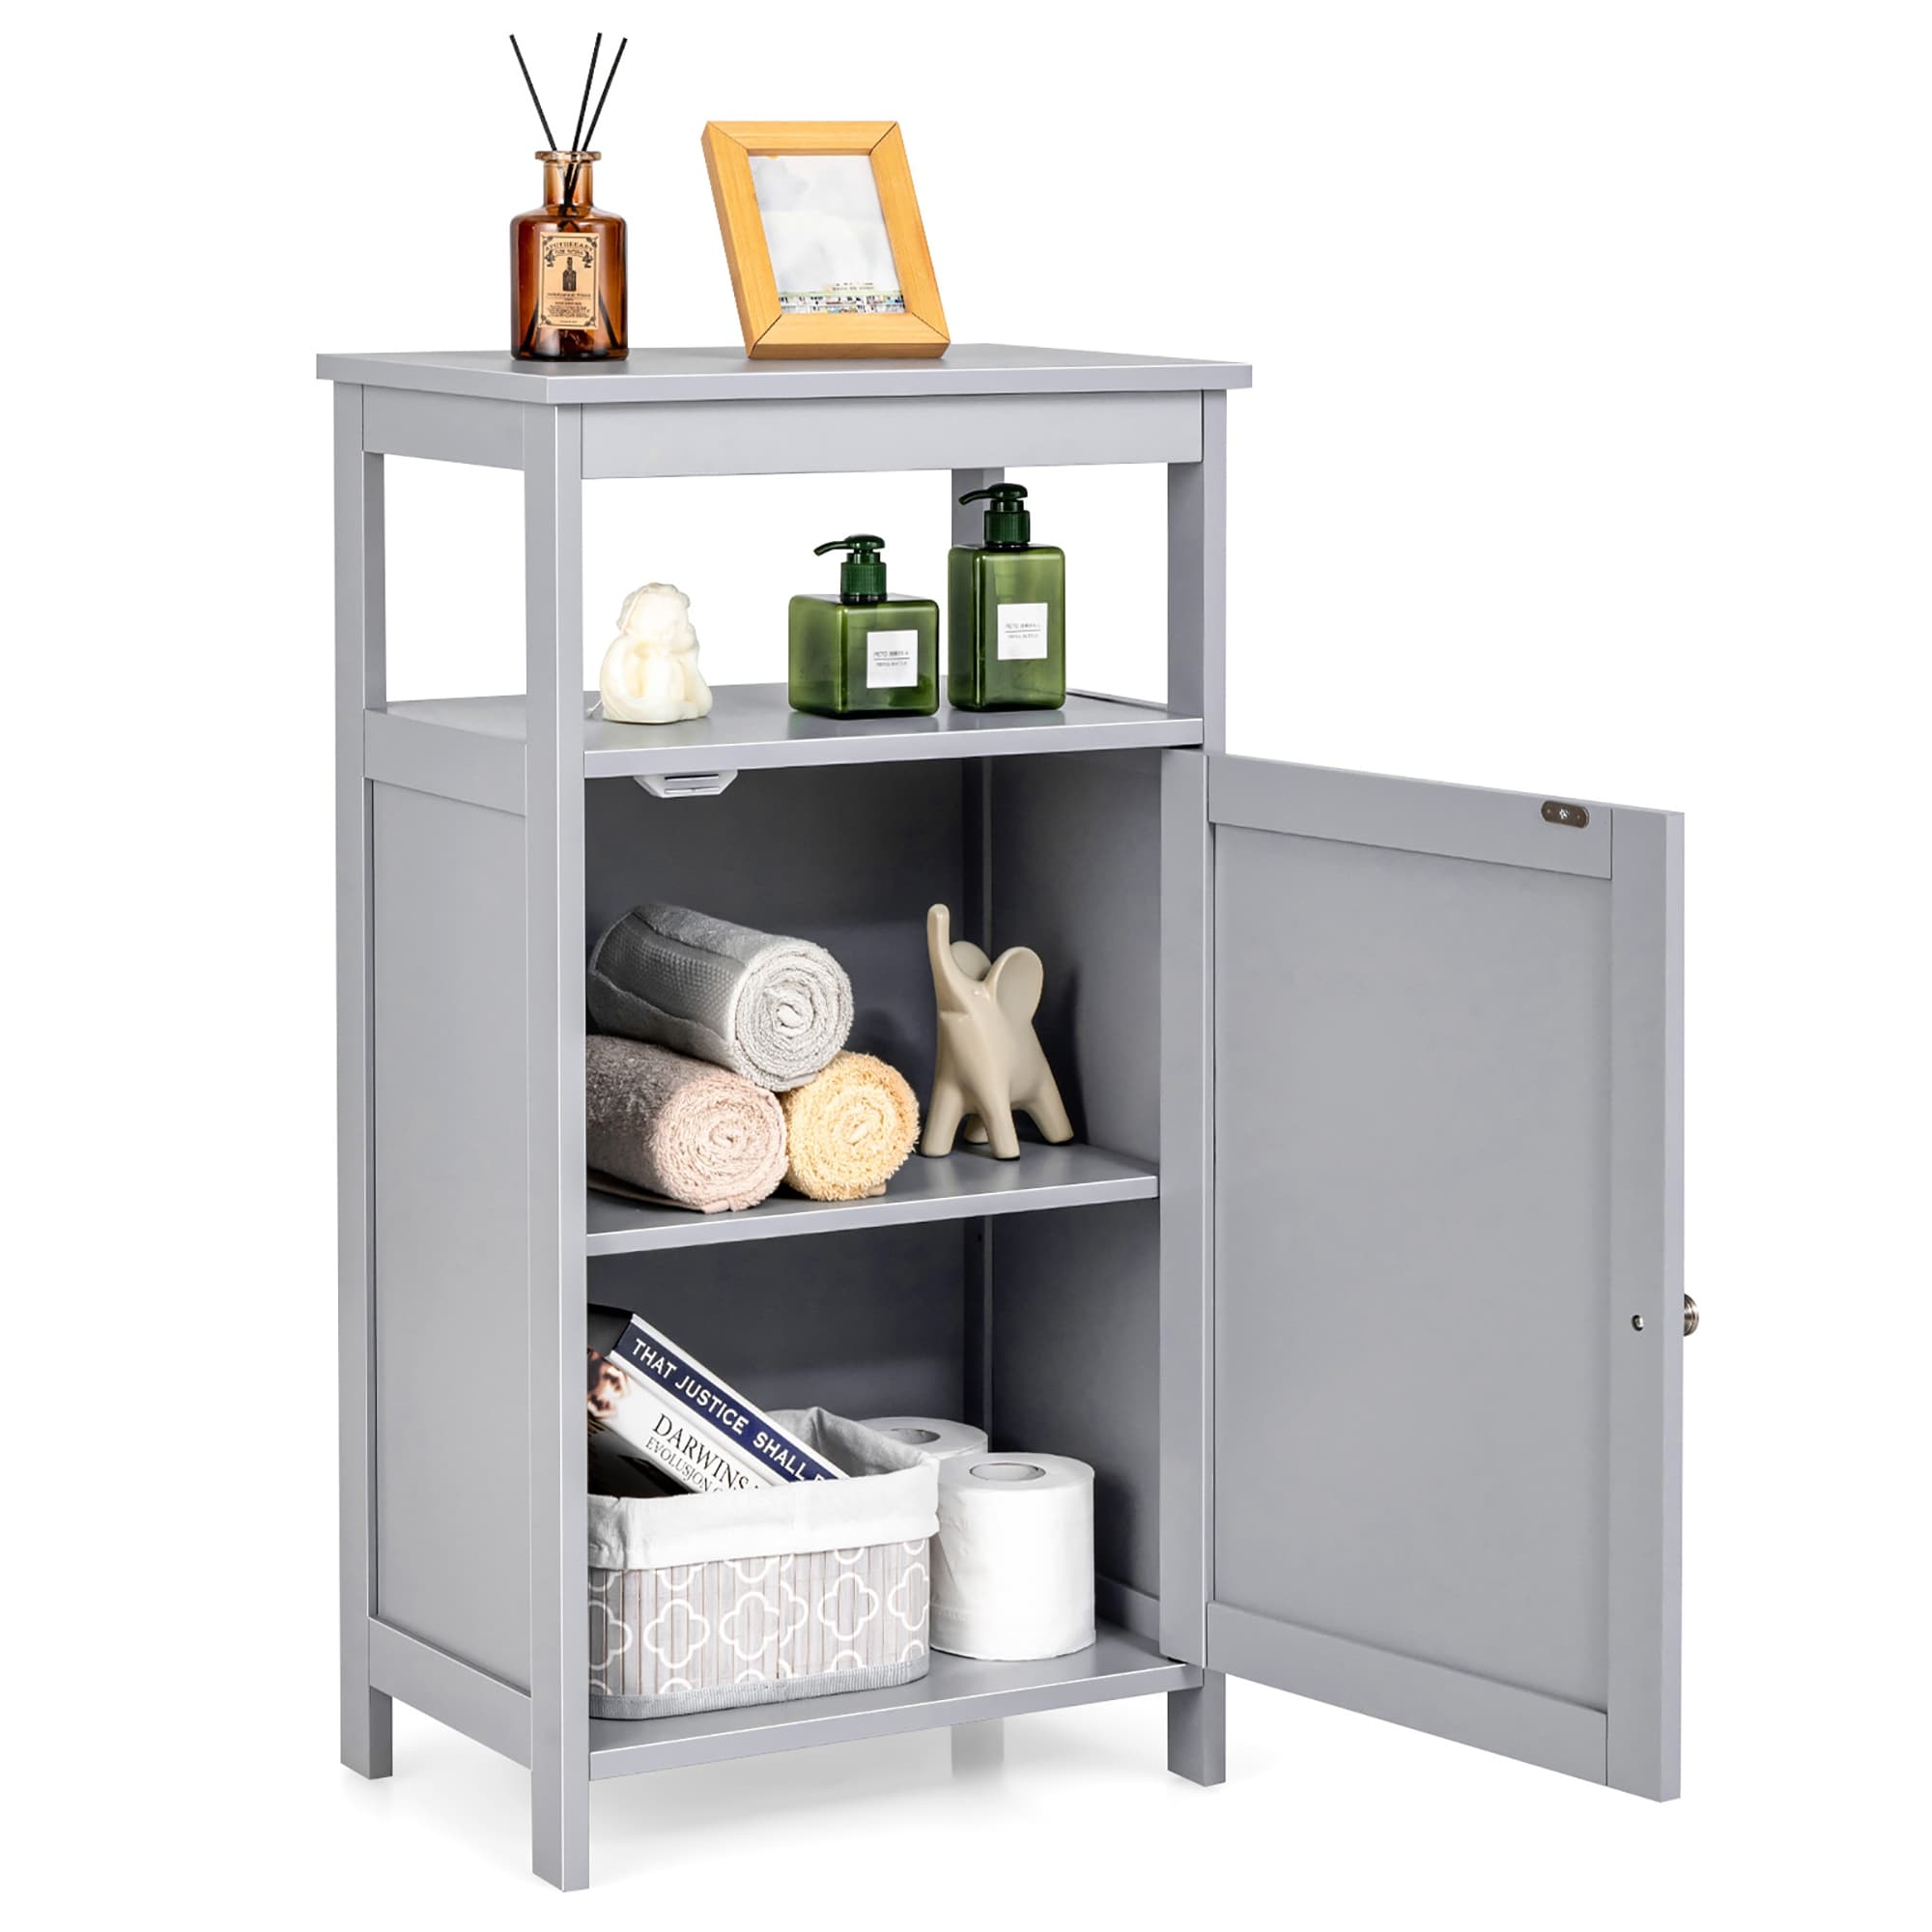 https://ak1.ostkcdn.com/images/products/is/images/direct/32f28ad28d08cee2ce45f4224cfa50e0bffc8f4d/Bathroom-Wooden-Floor-Cabinet-Multifunction-Storage-Rack-Organizer.jpg